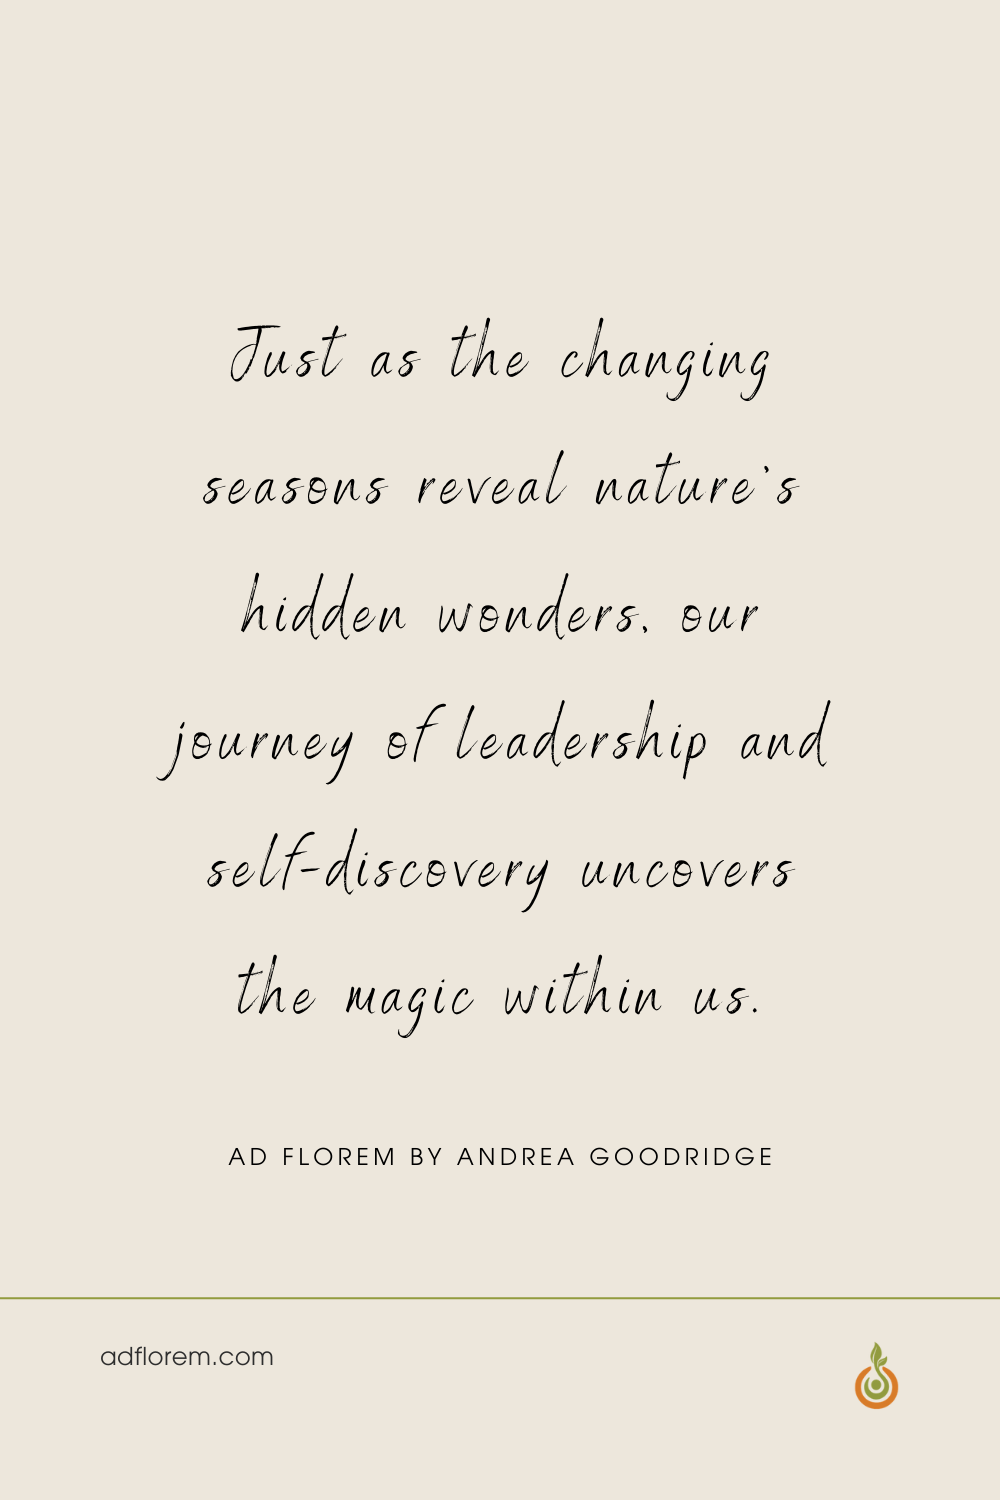 Inspirational quote about Autumn and Fall. Just as the changing seasons reveal nature's hidden wonders, our journey of leadership and self-discovery uncovers the magic within us. Ad Florem by Andrea Goodridge